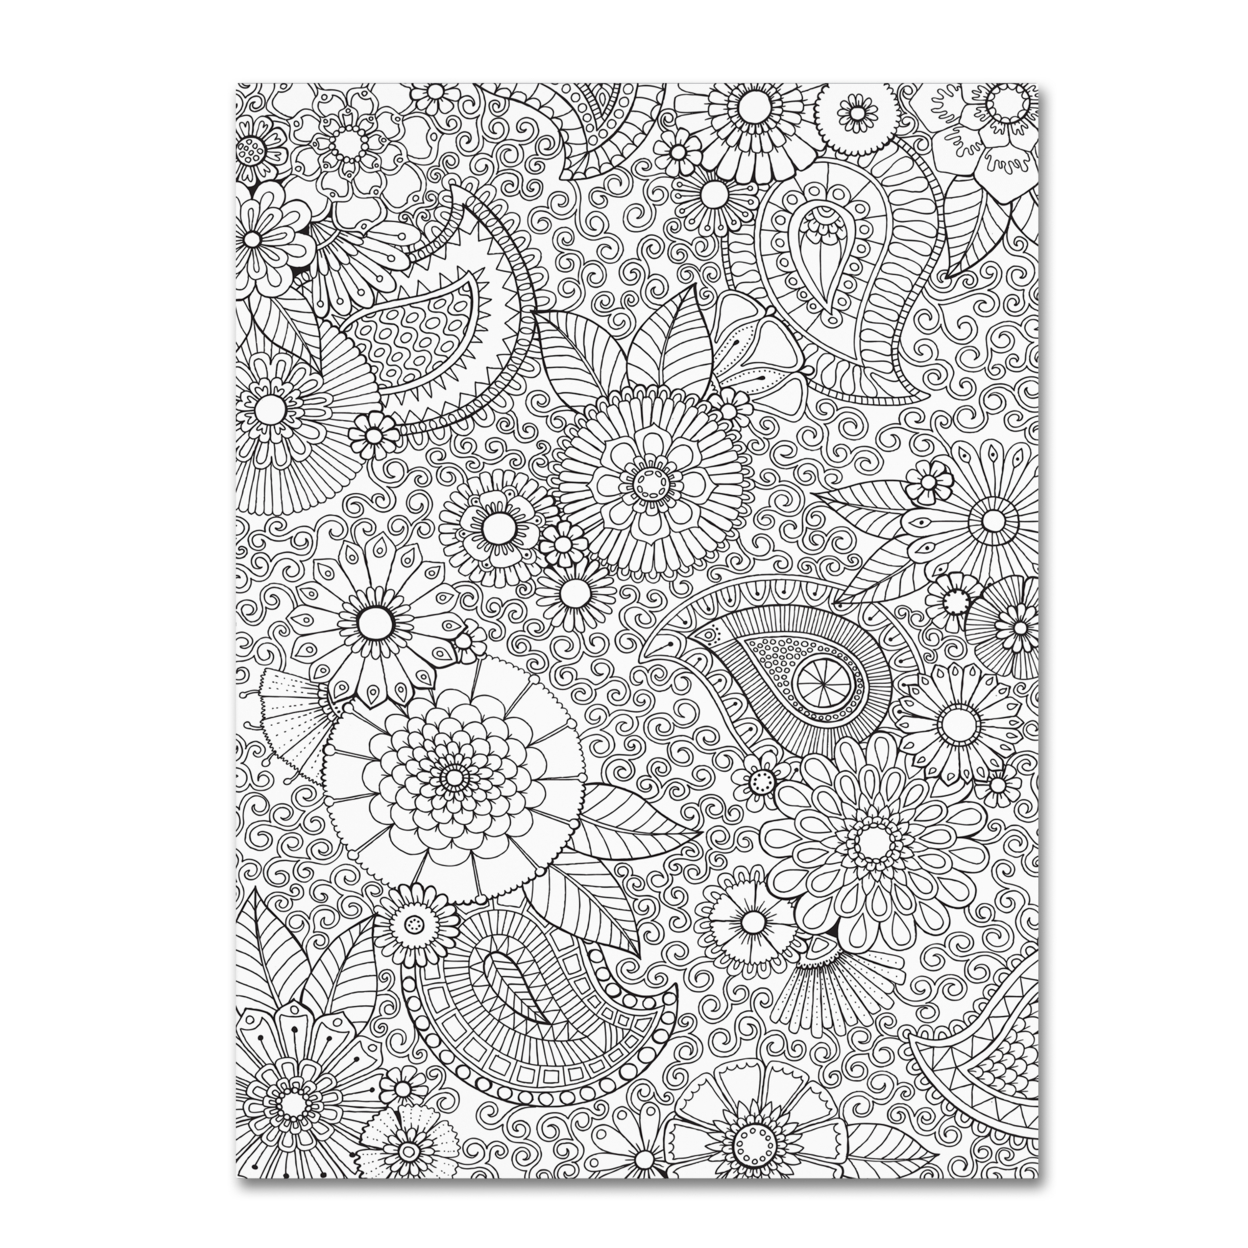 Hello Angel 'Paisley Floral' Canvas Wall Art 35 X 47 Inches